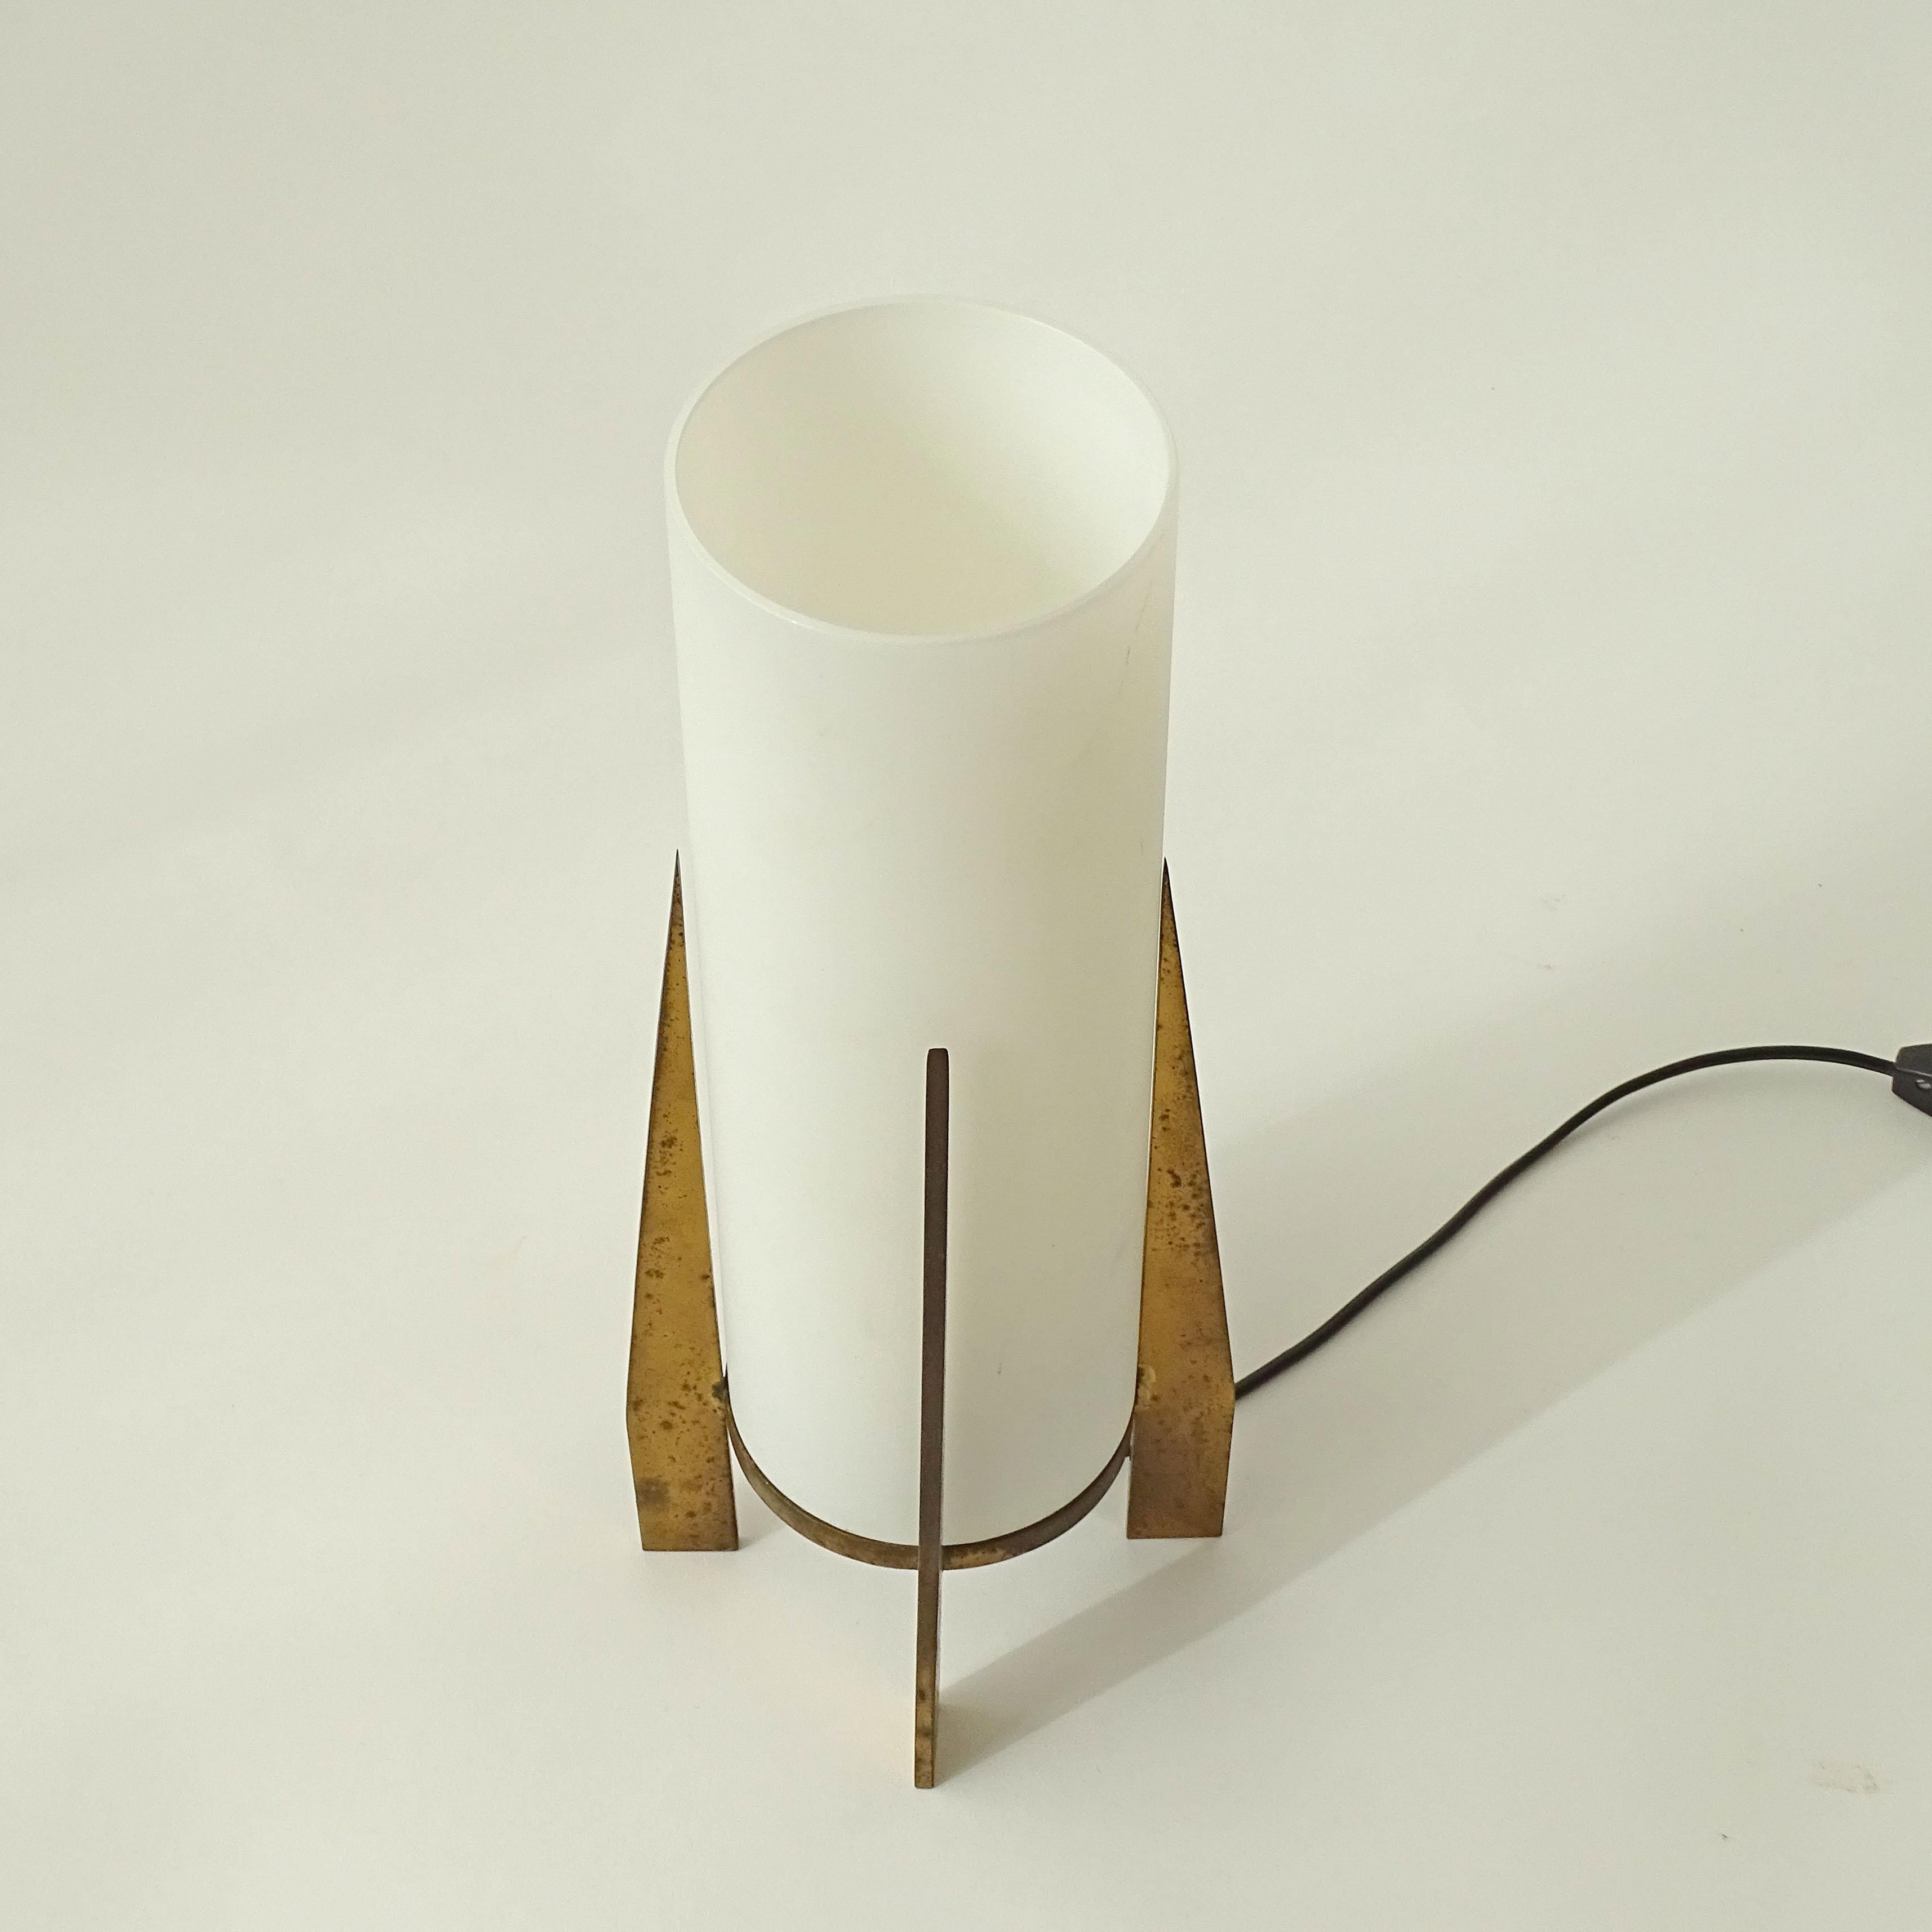 Italian Stilnovo Brass and Glass Table Lamp, Italy 1950s For Sale